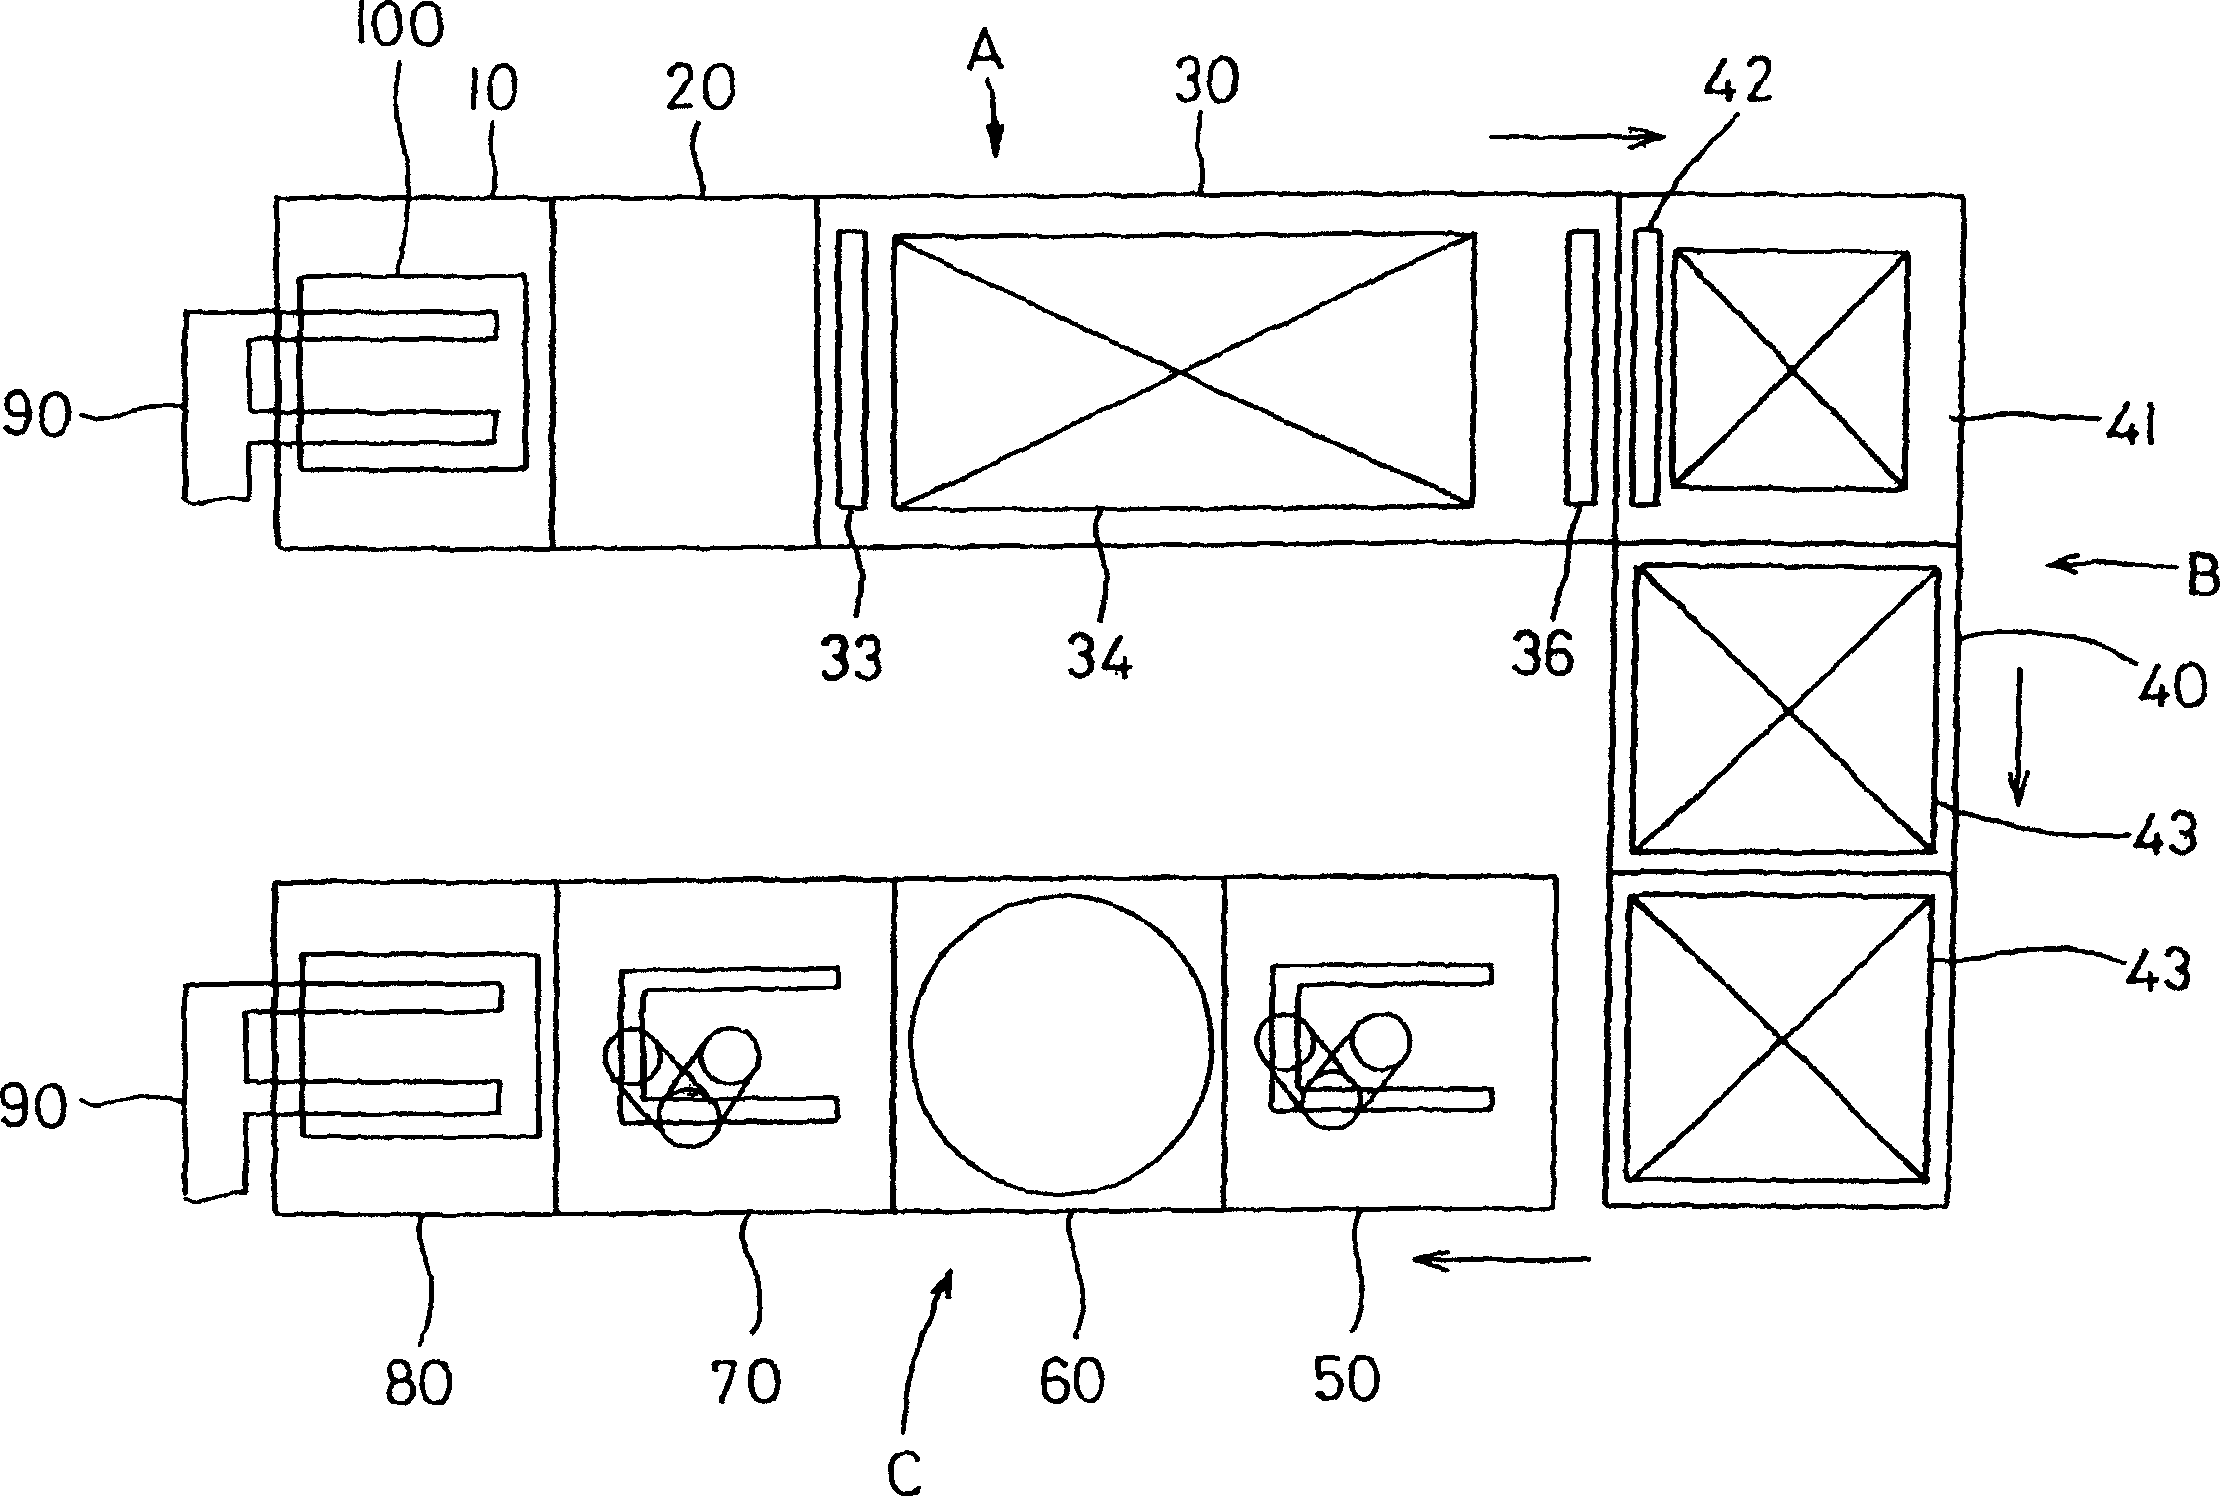 Substrate processing devices